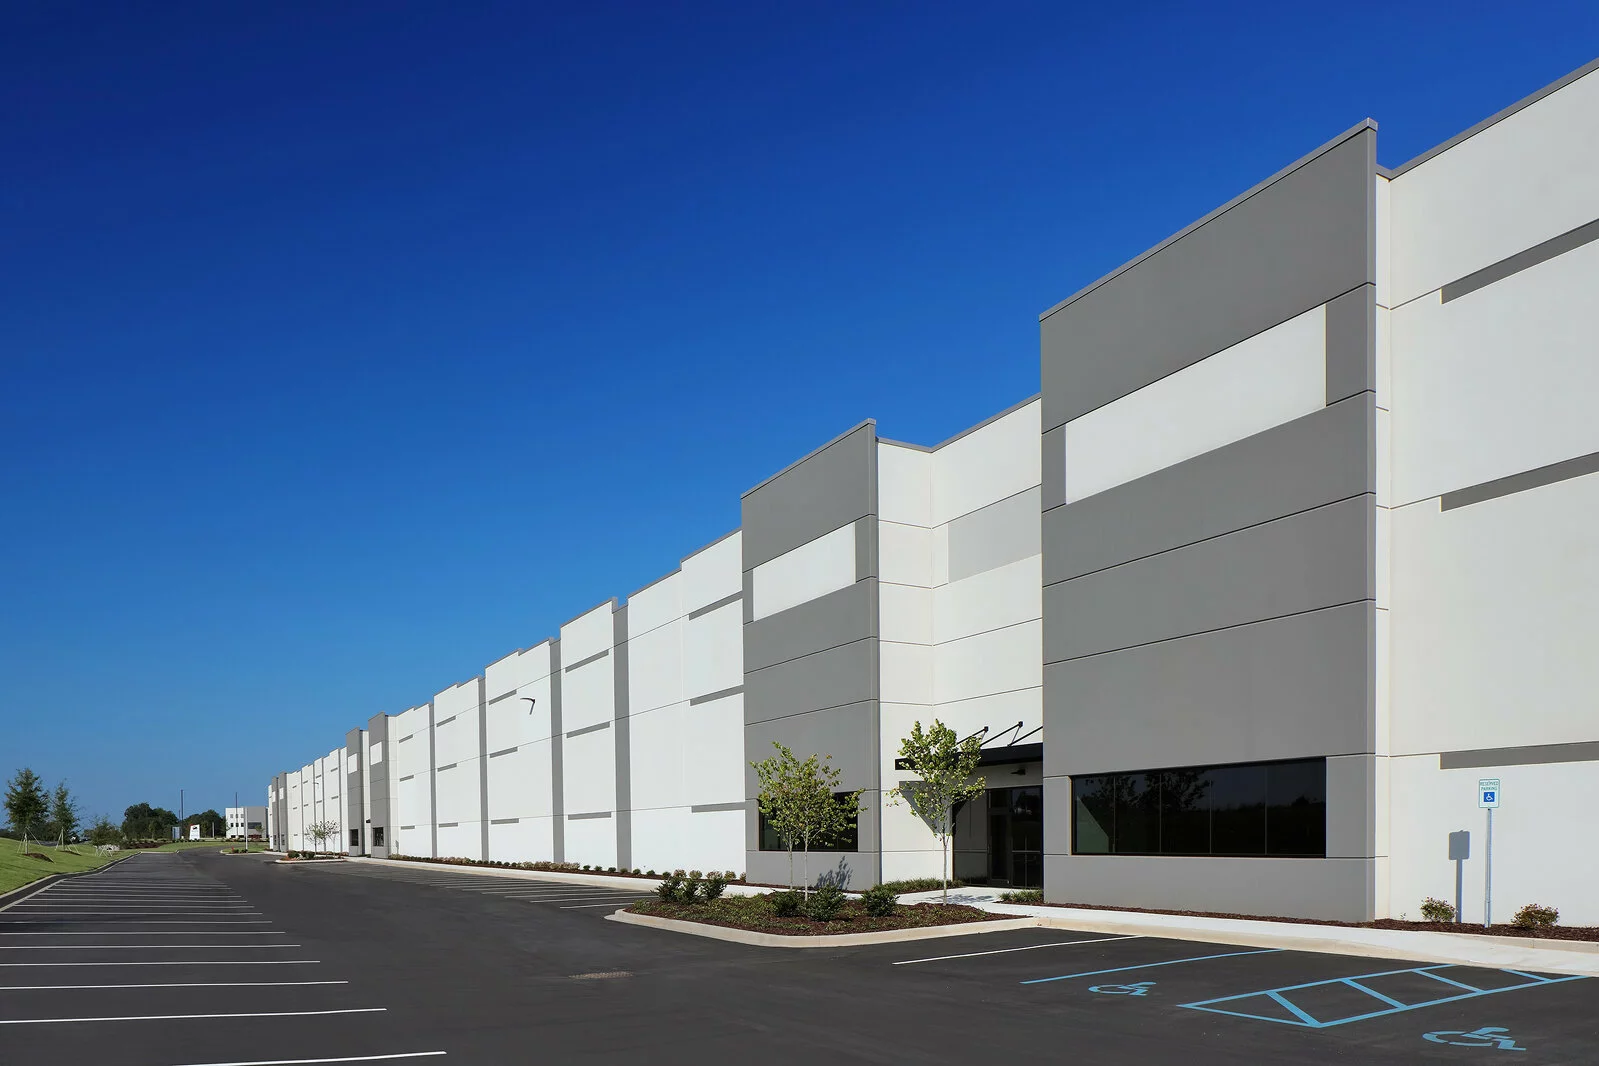 Exterior photo of warehouse, gray and white walls, parking in front, photo taken on a sunny day.